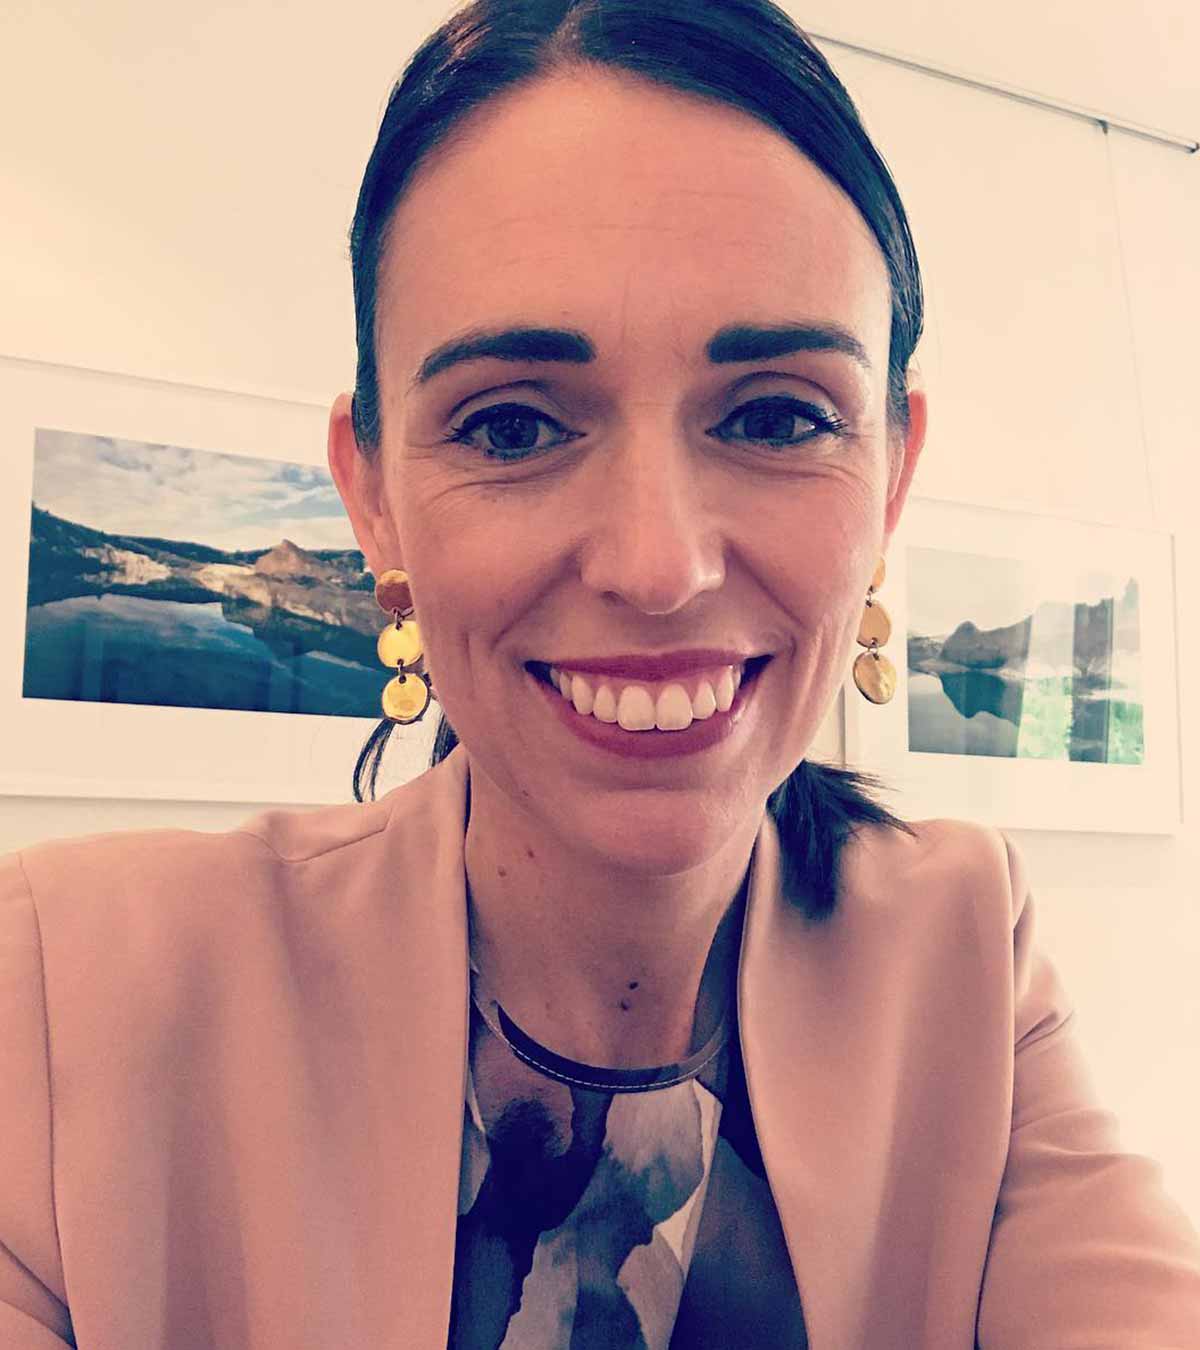 Meet Jacinda Ardern: The Badass Mom And PM Who Dealt With A Major Terrorist Attack, Volcanic Eruption And Pandemic